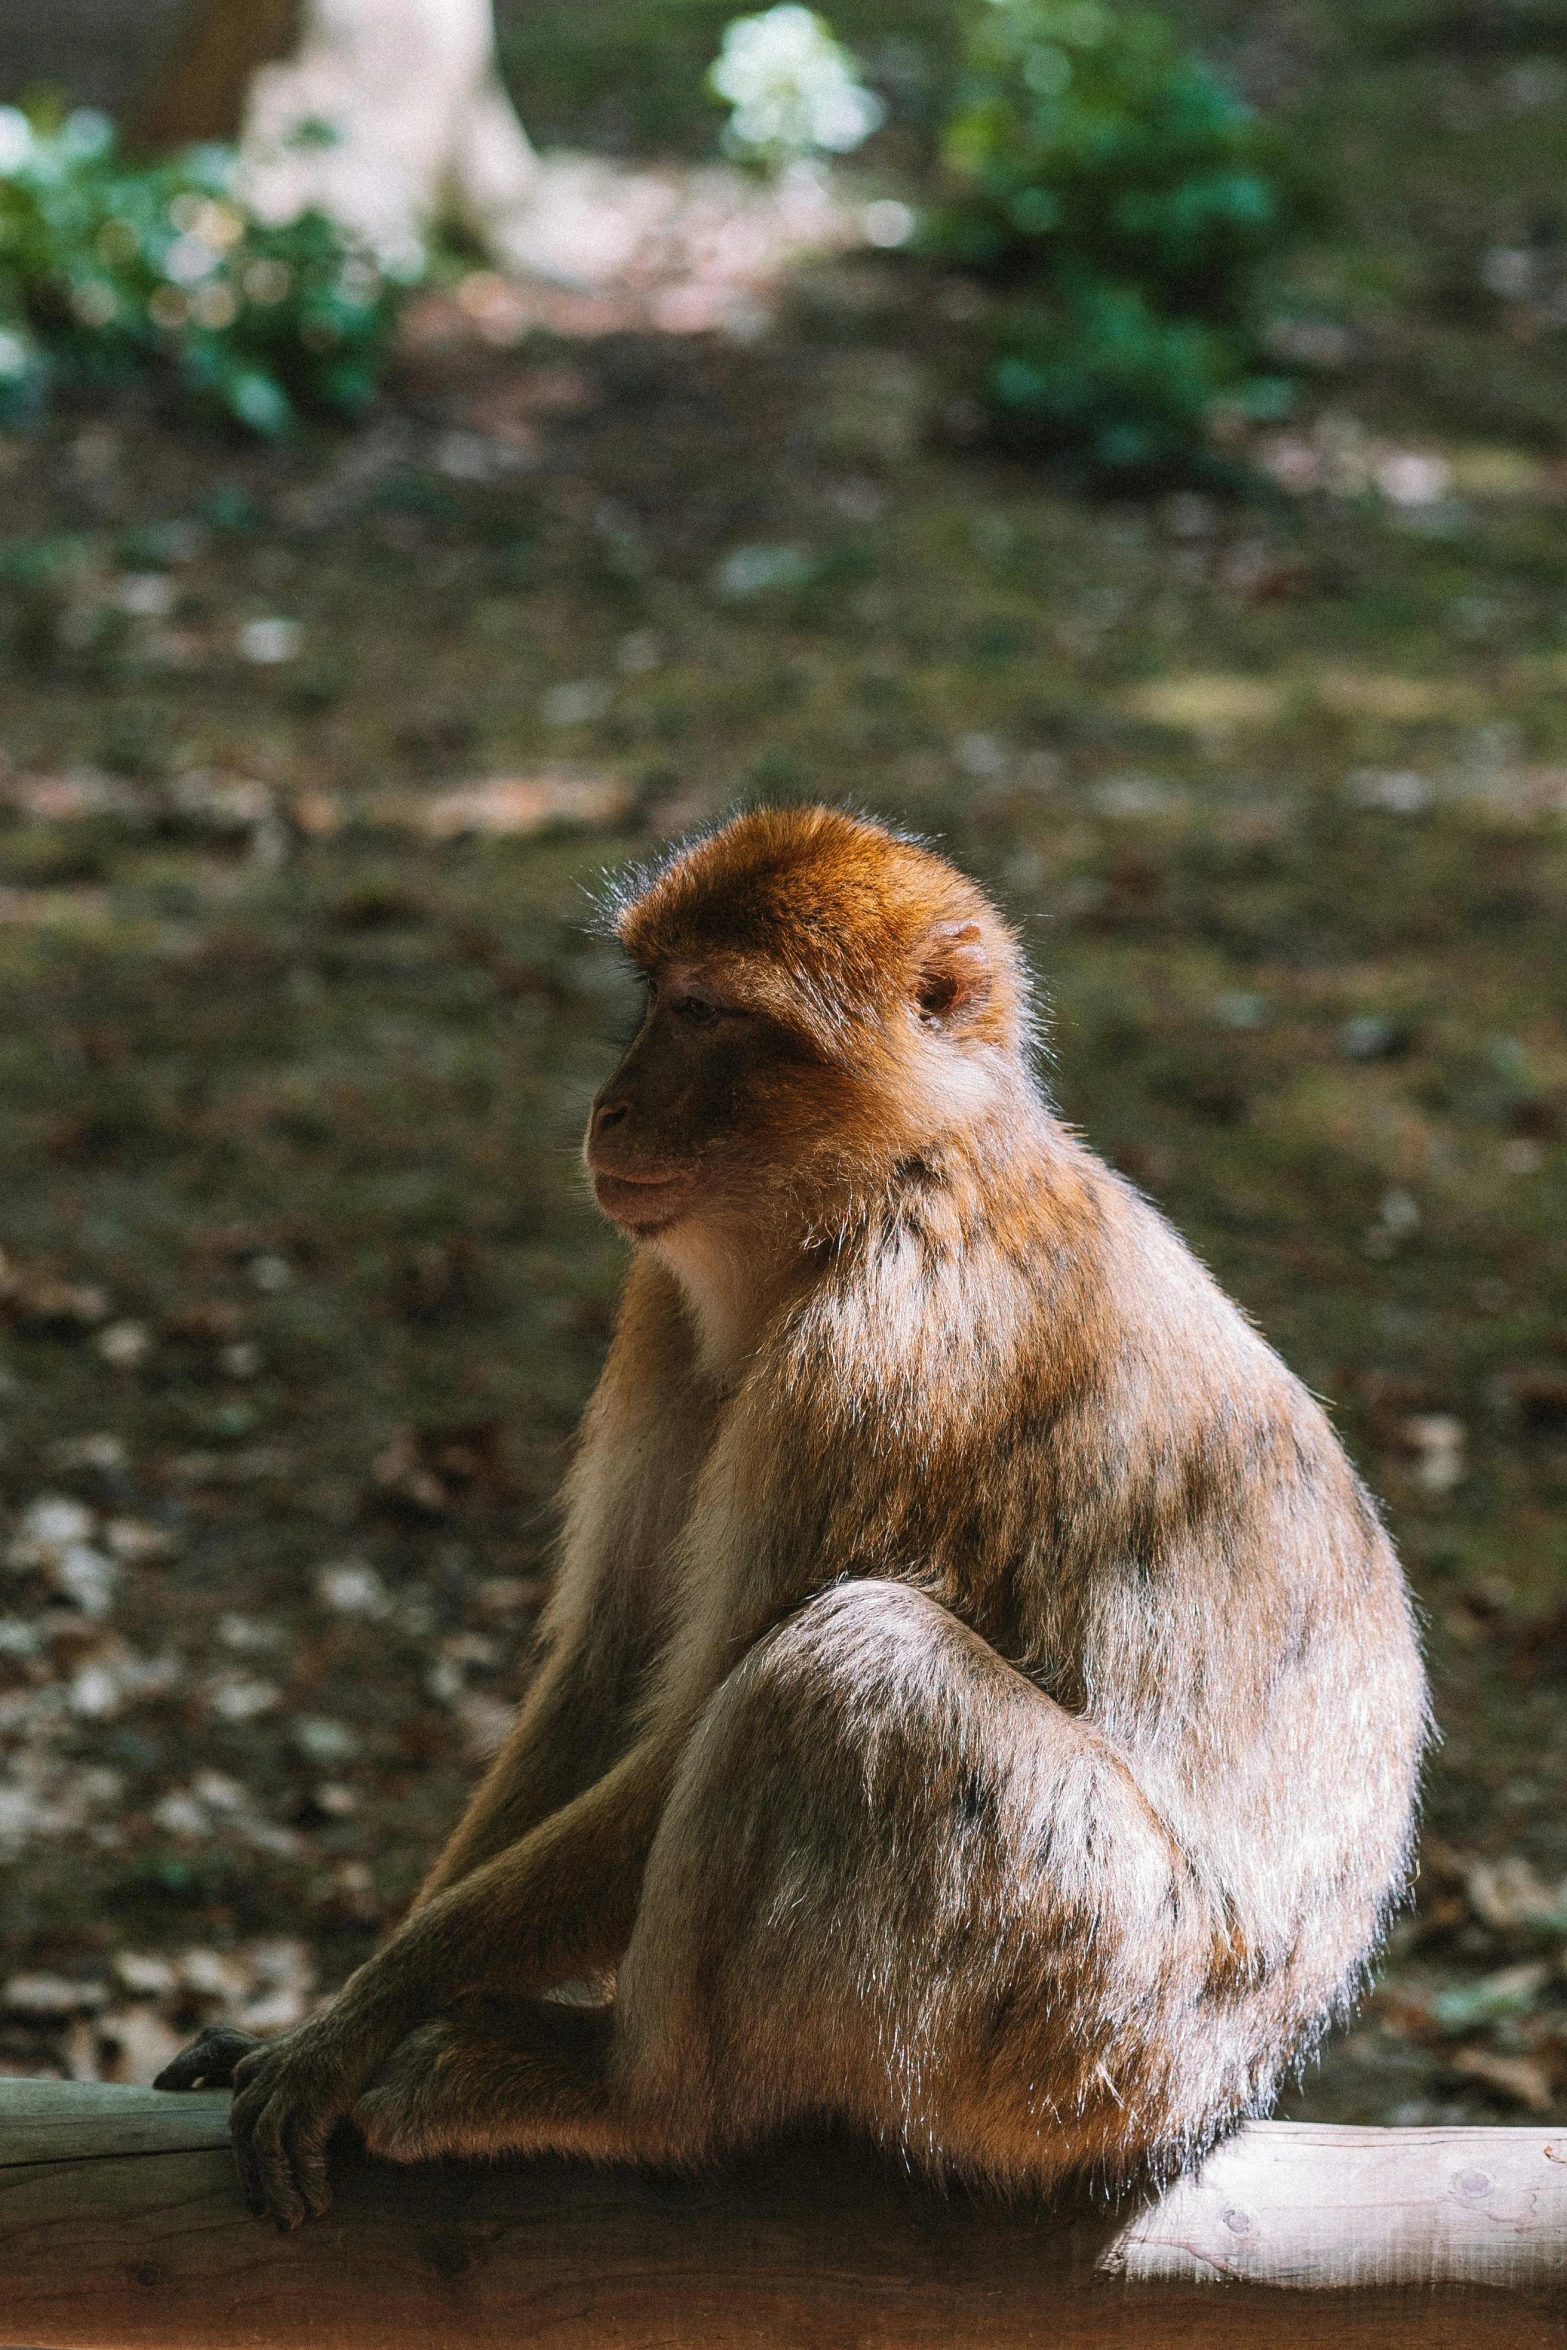 a monkey sitting on a ledge outside in the park